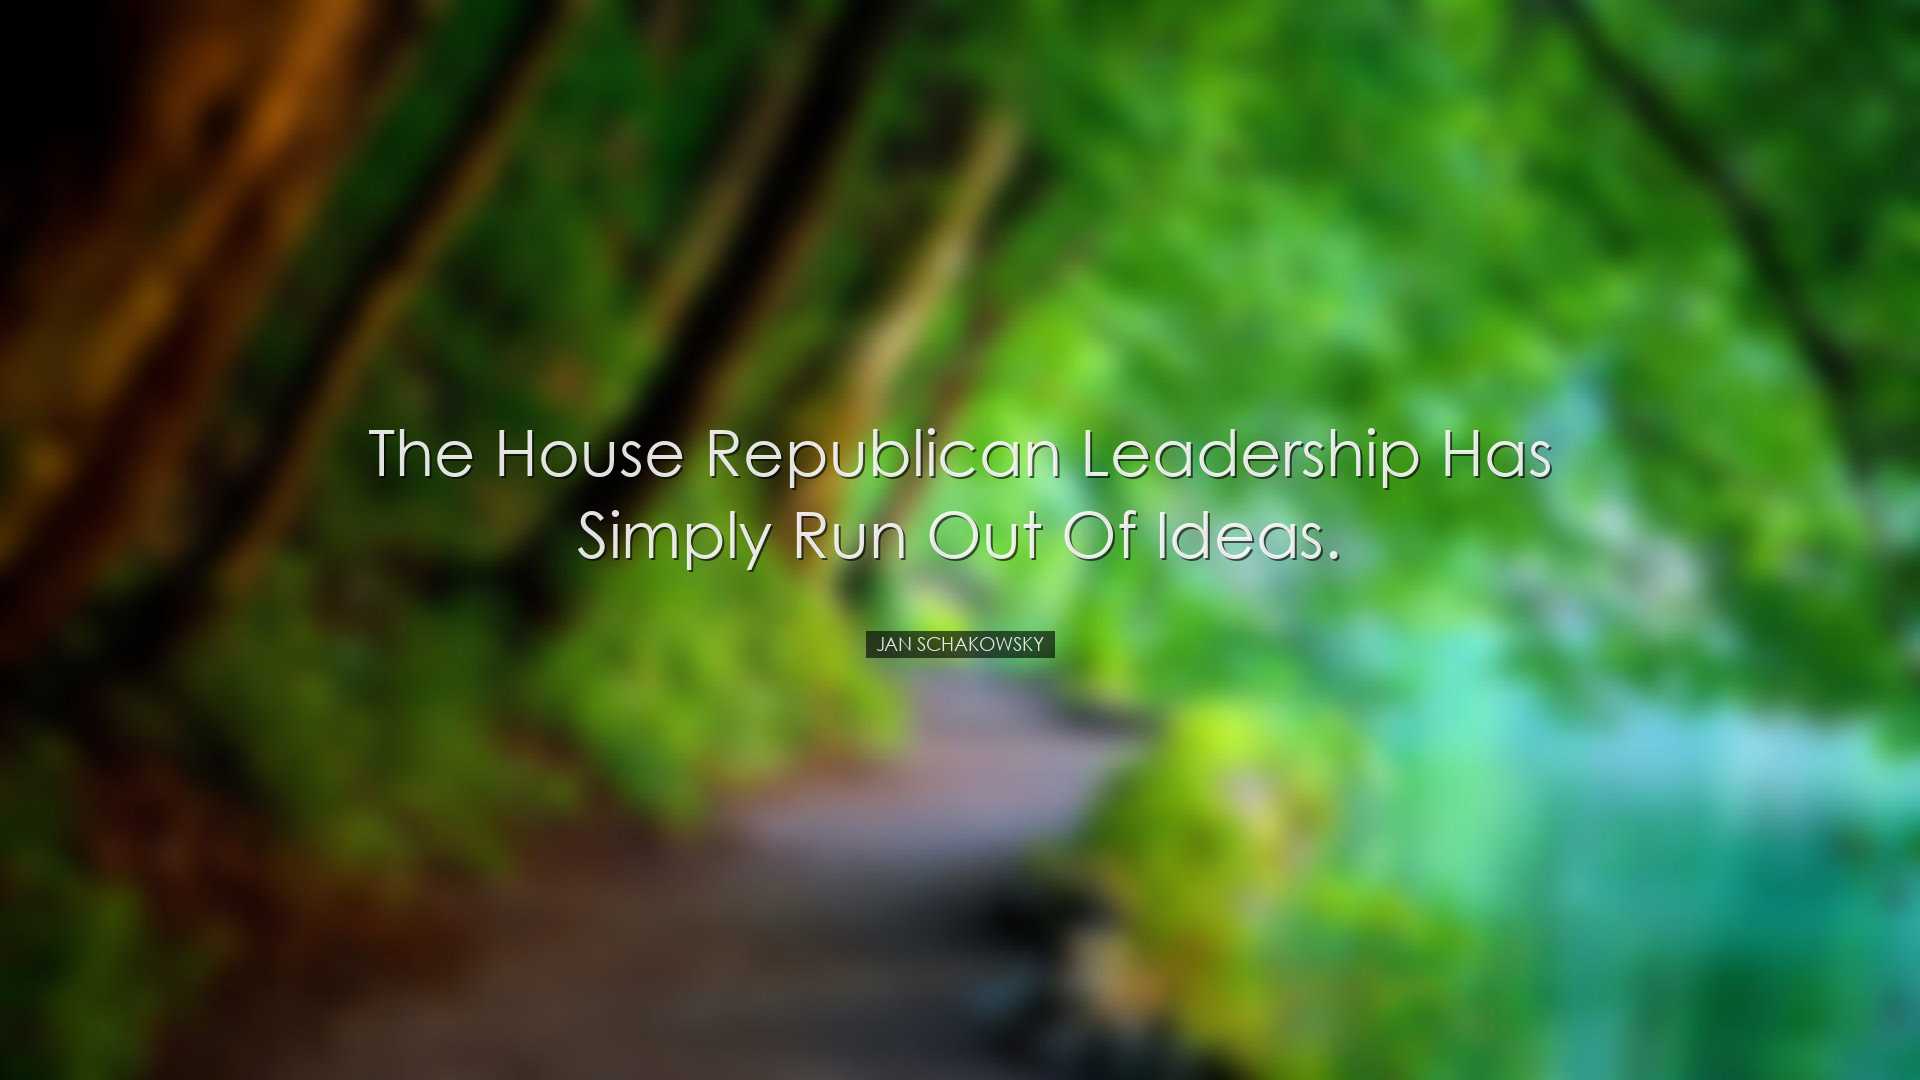 The House Republican leadership has simply run out of ideas. - Jan